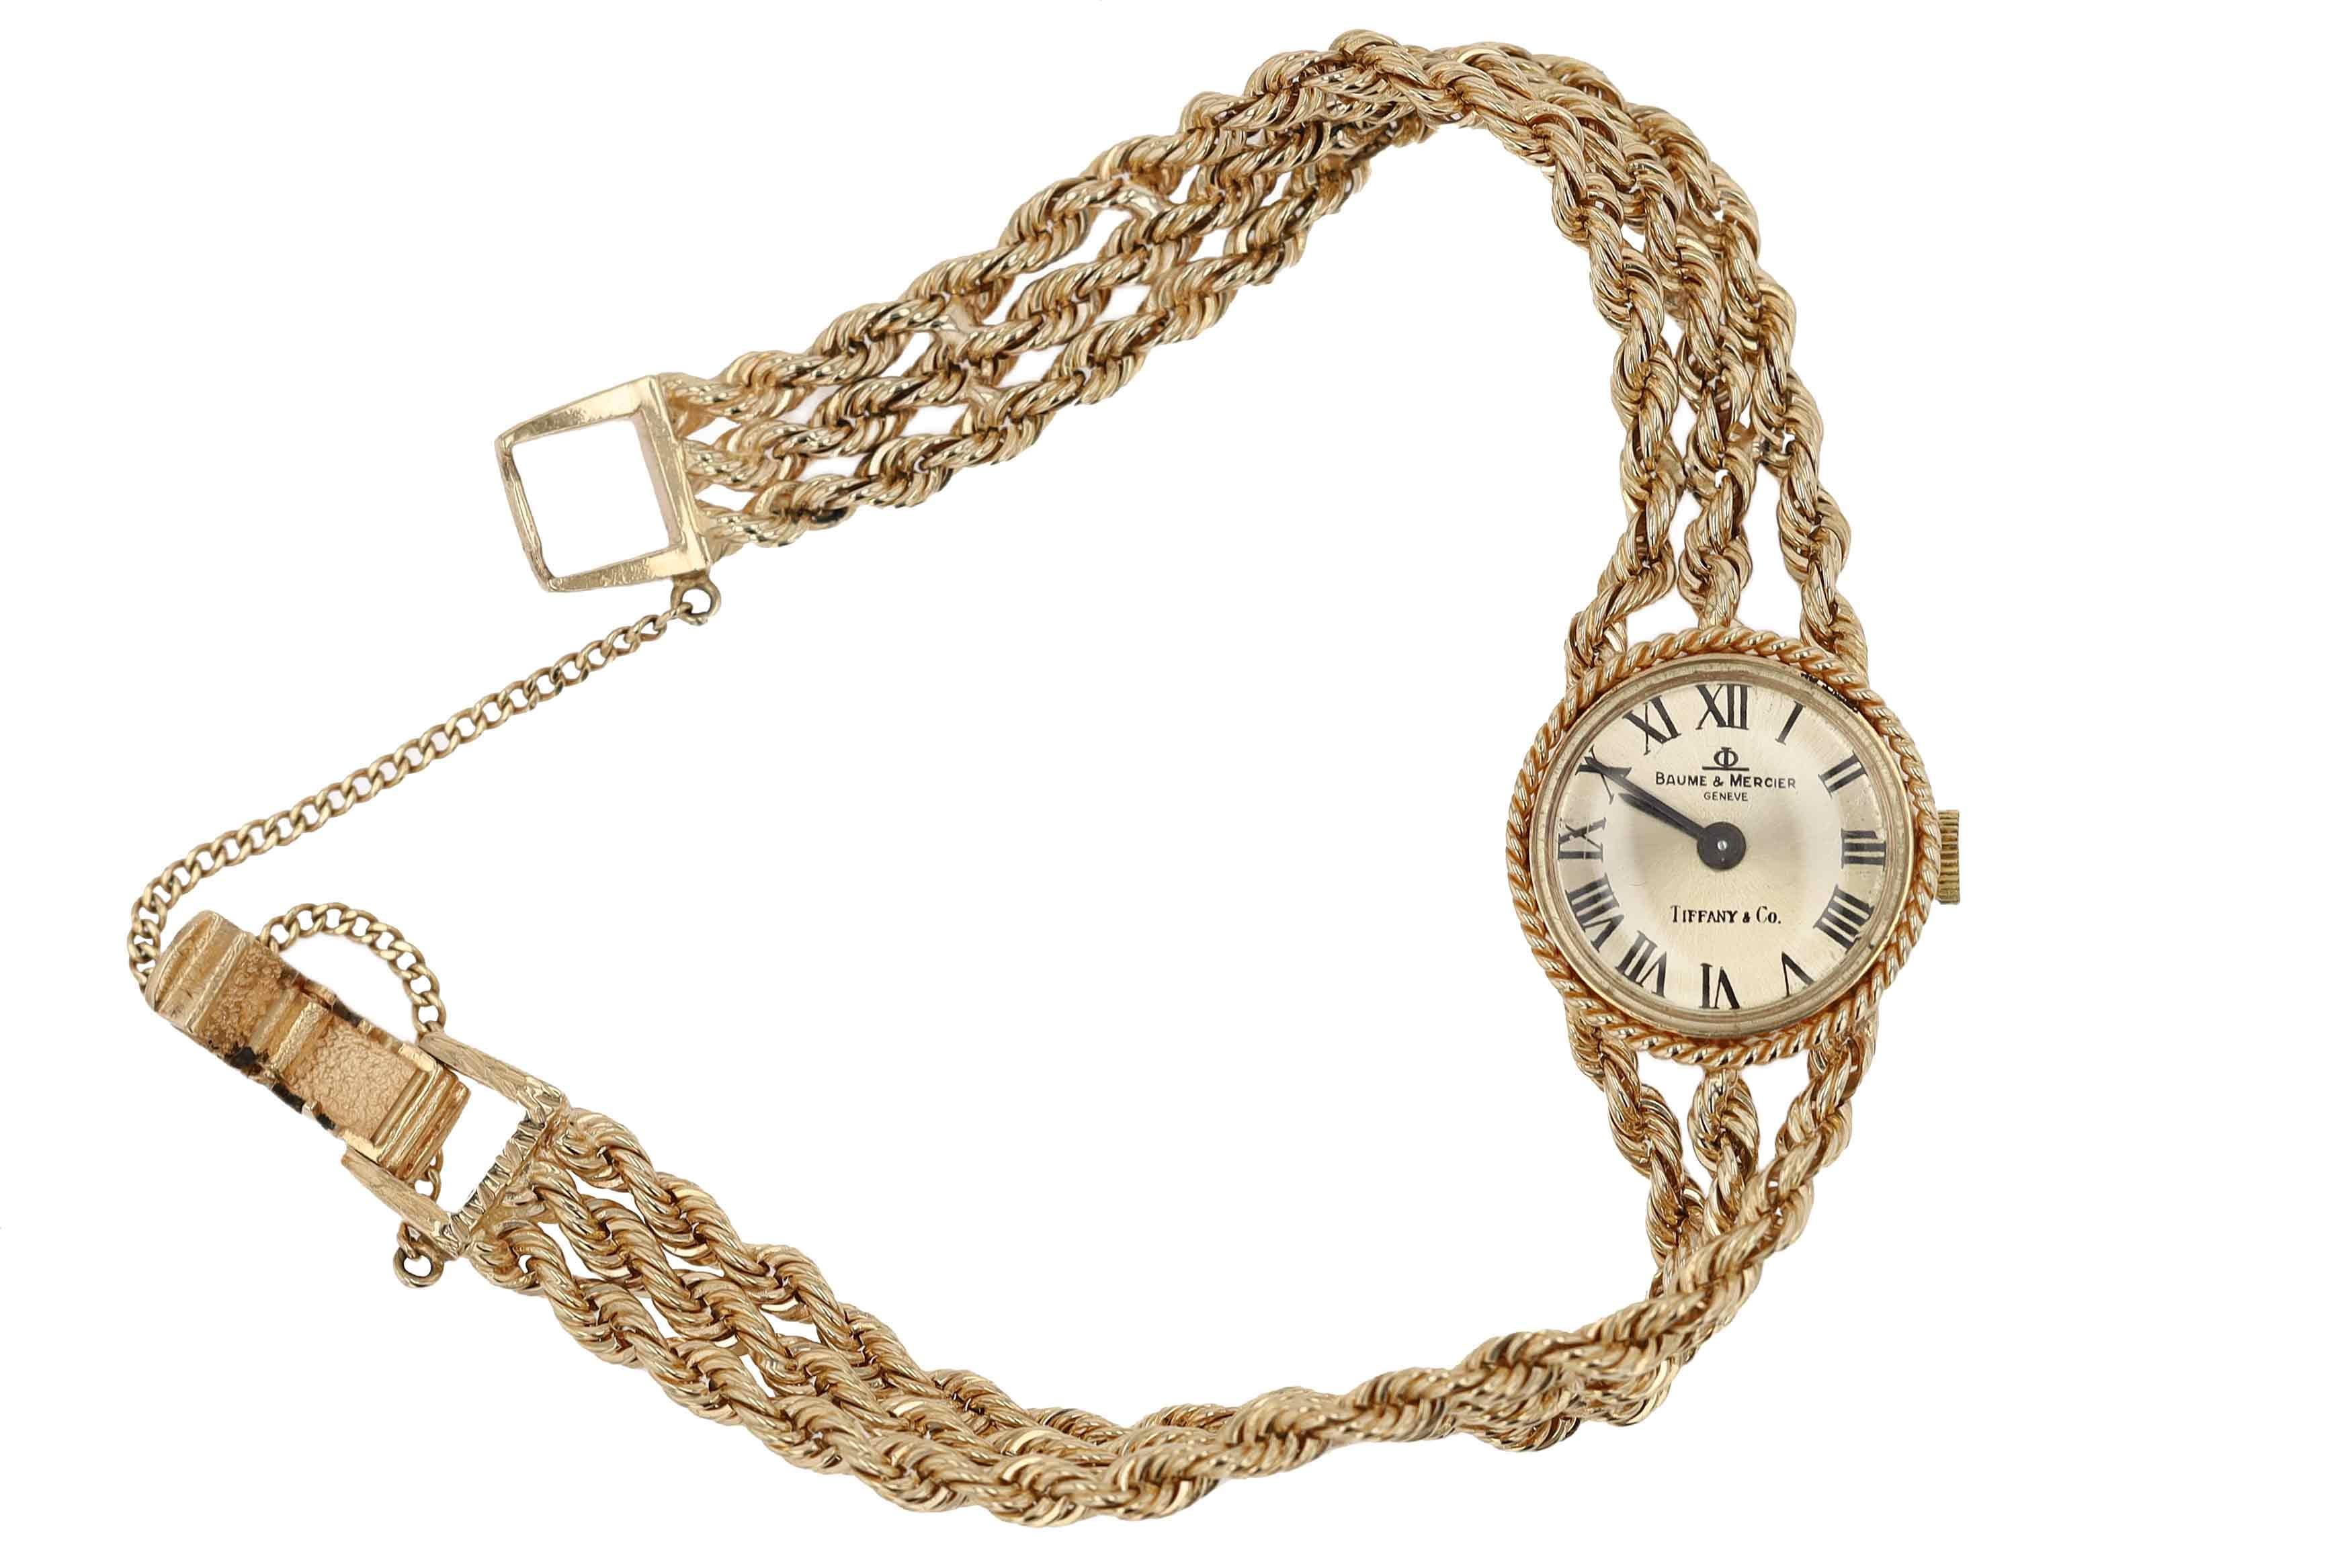 Boasting a minimalist design, this delightful 1970s Tiffany & Co. cocktail / dress watch is the quintessential accessory for any vintage fashionista. The classy 14 karat yellow gold, solid 3 strand rope bracelet offers a luxurious statement from all